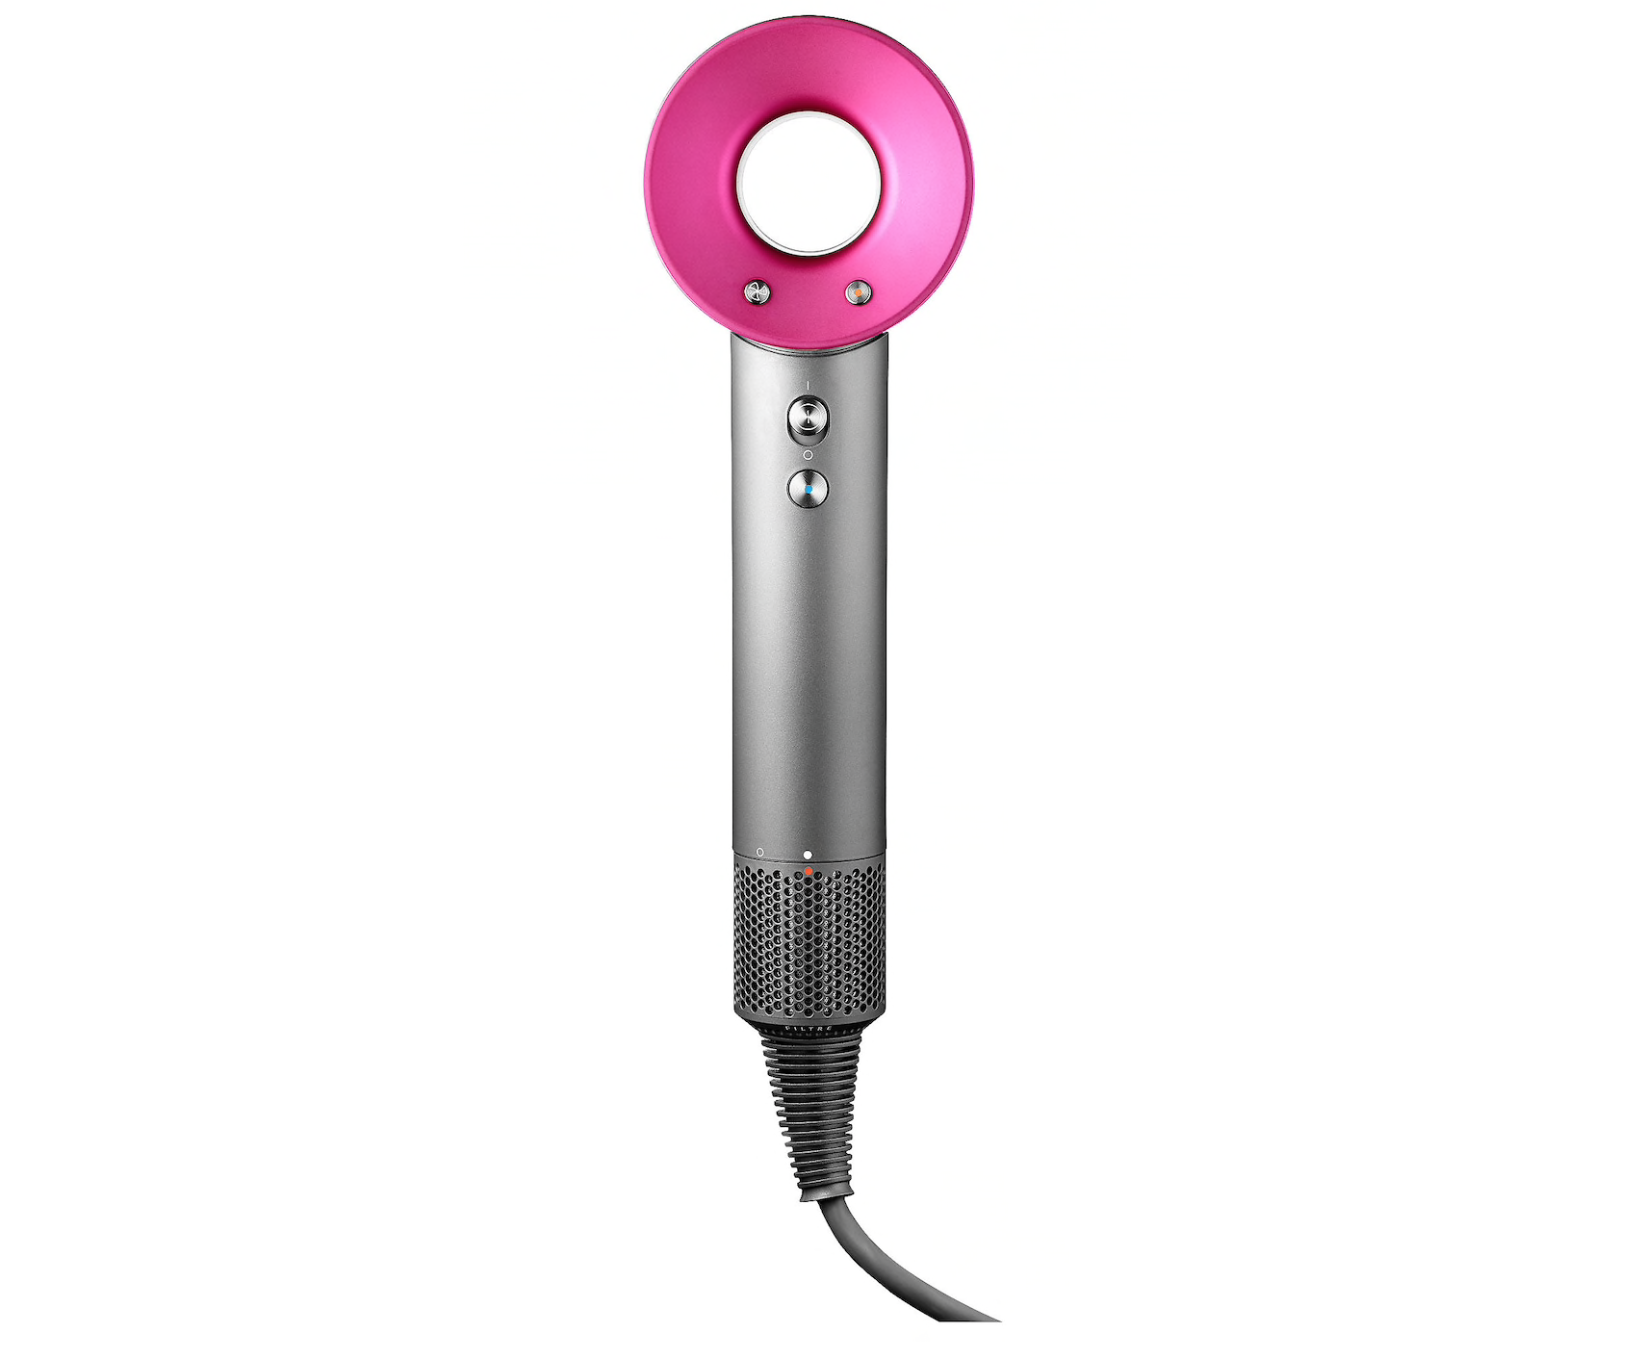 Dyson Supersonic Hair dryer in Iron